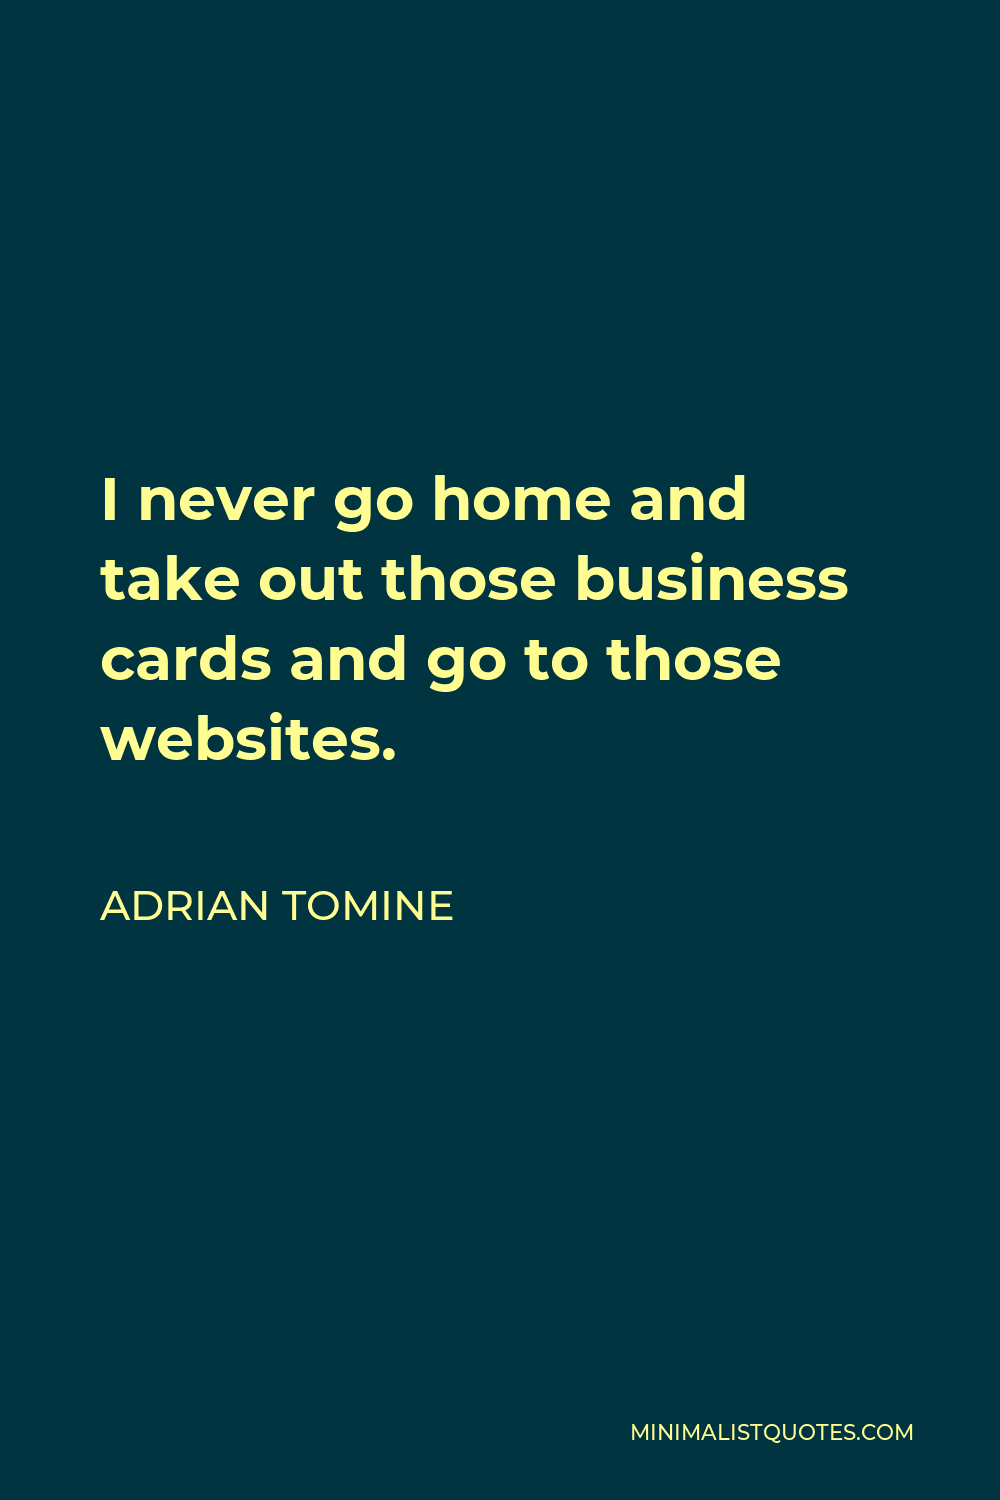 Adrian Tomine Quote - I never go home and take out those business cards and go to those websites.